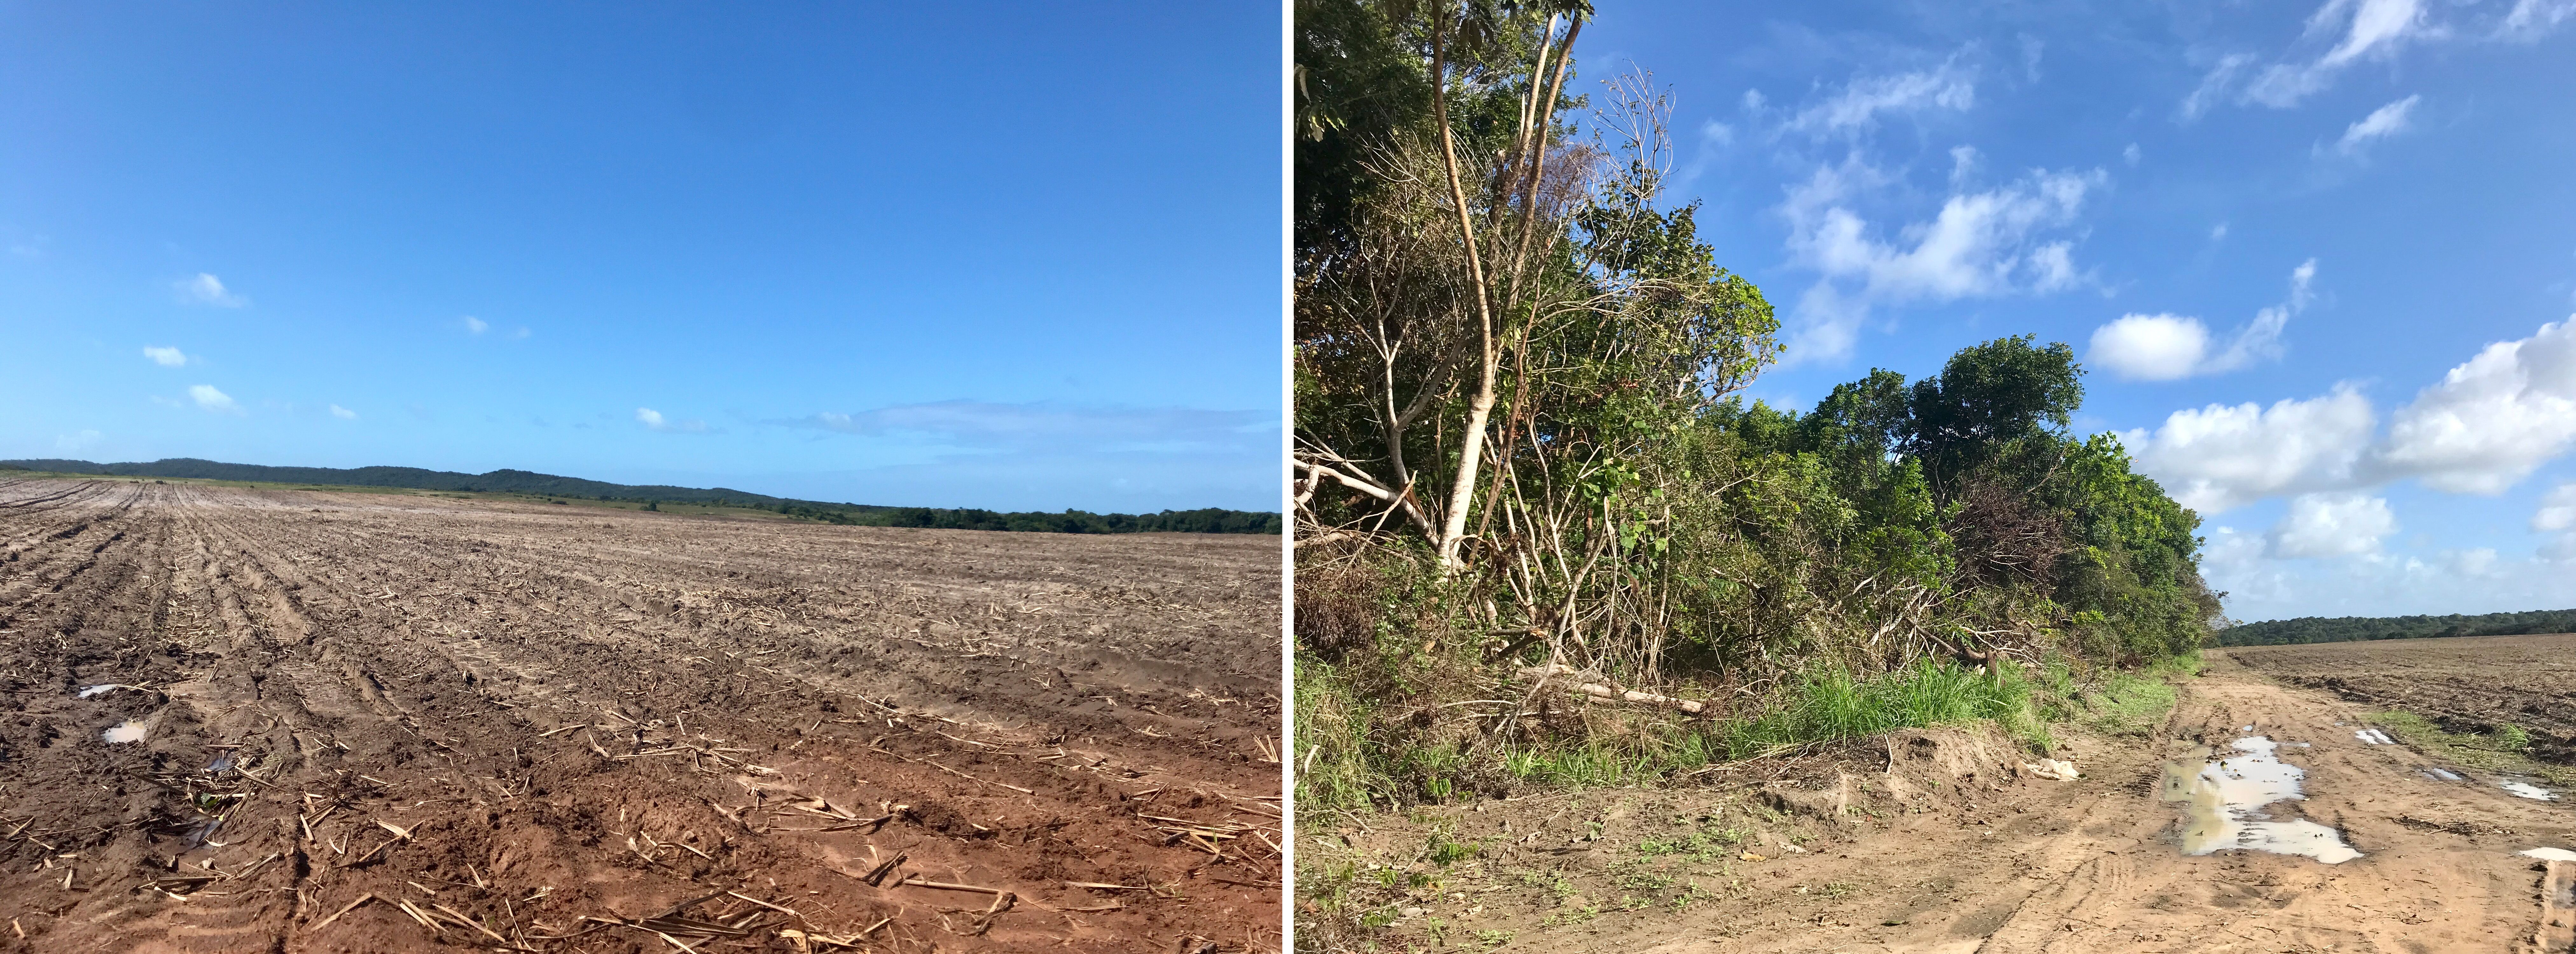 Areas near the Indigenous village of Sagi/Trabanda recently deforested for the expansion of sugarcane fields. Image by Rafael Lima. Brazil, 2019.